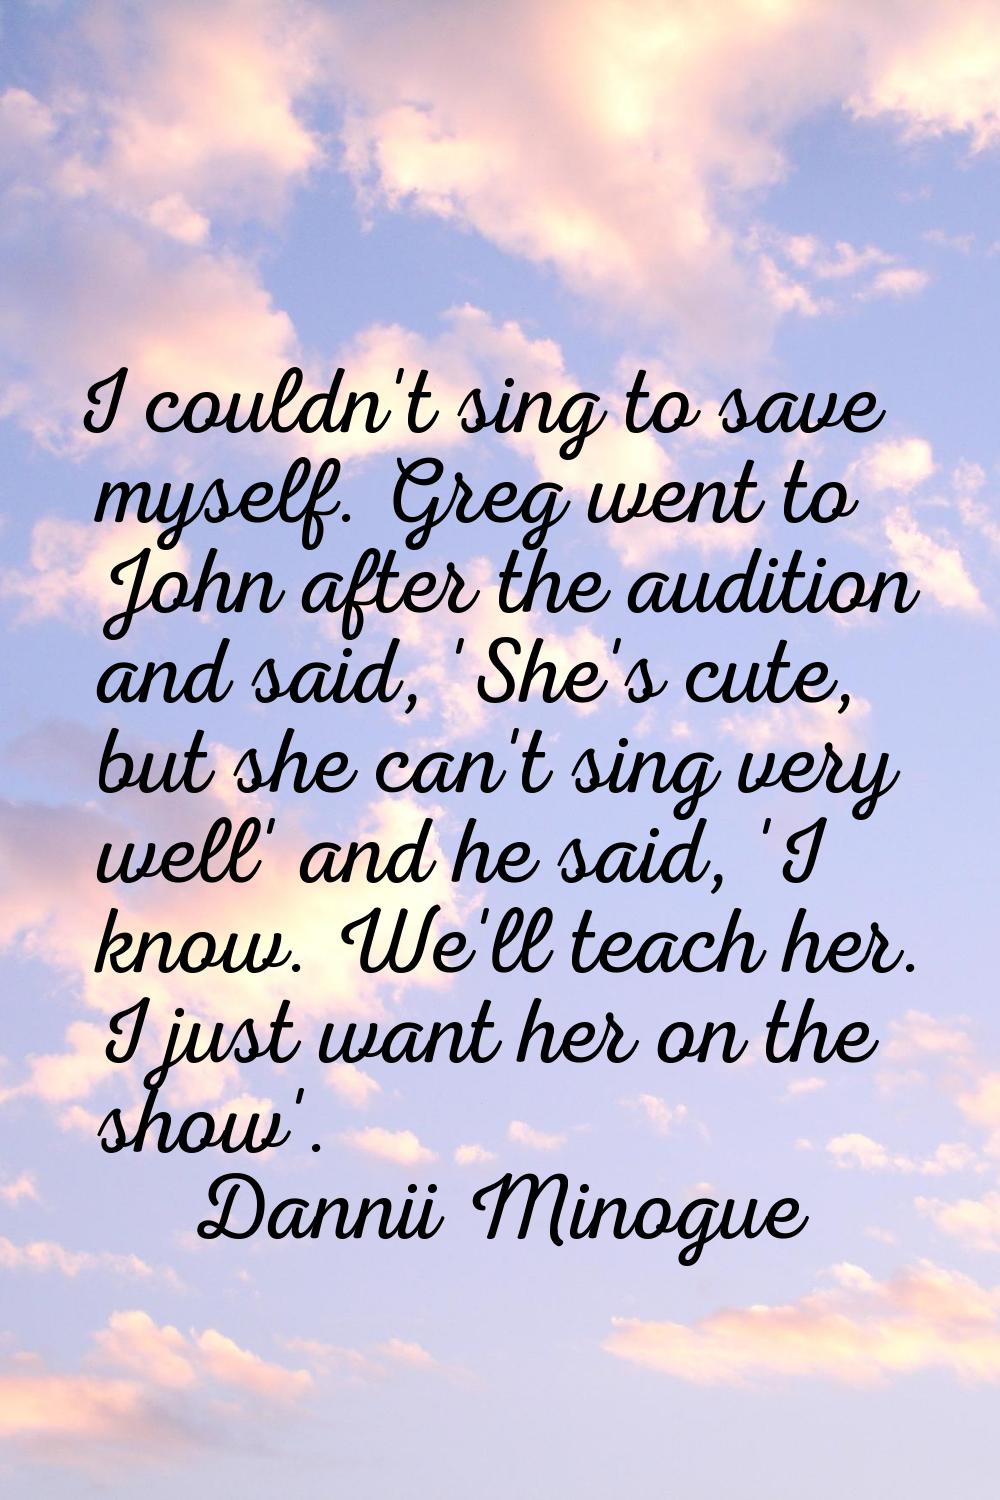 I couldn't sing to save myself. Greg went to John after the audition and said, 'She's cute, but she